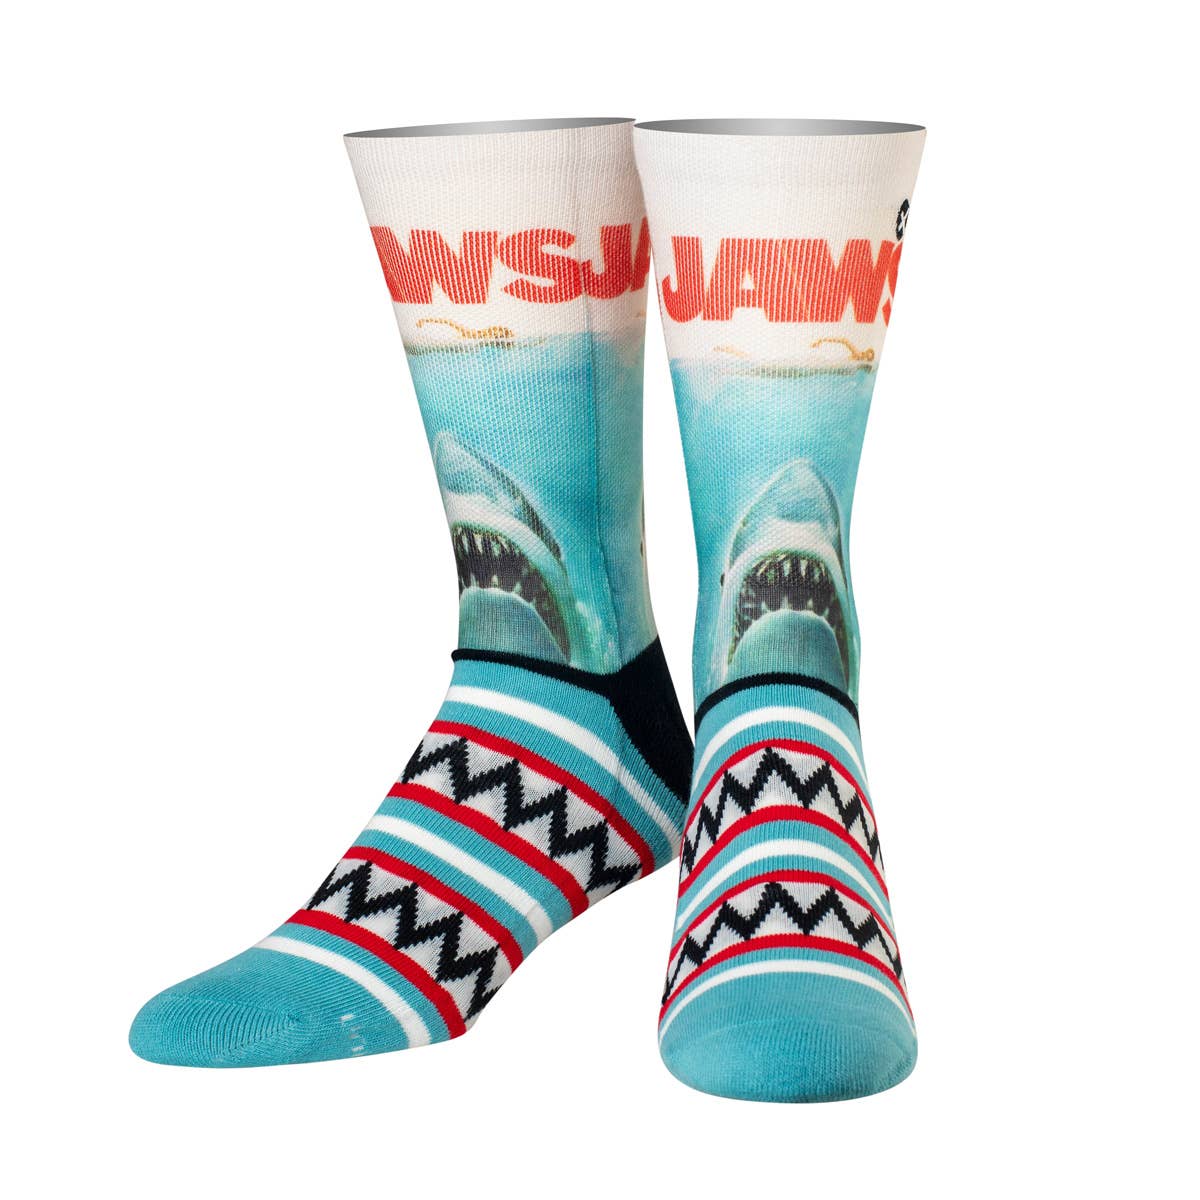 Socks - Jaws Sublimated Top